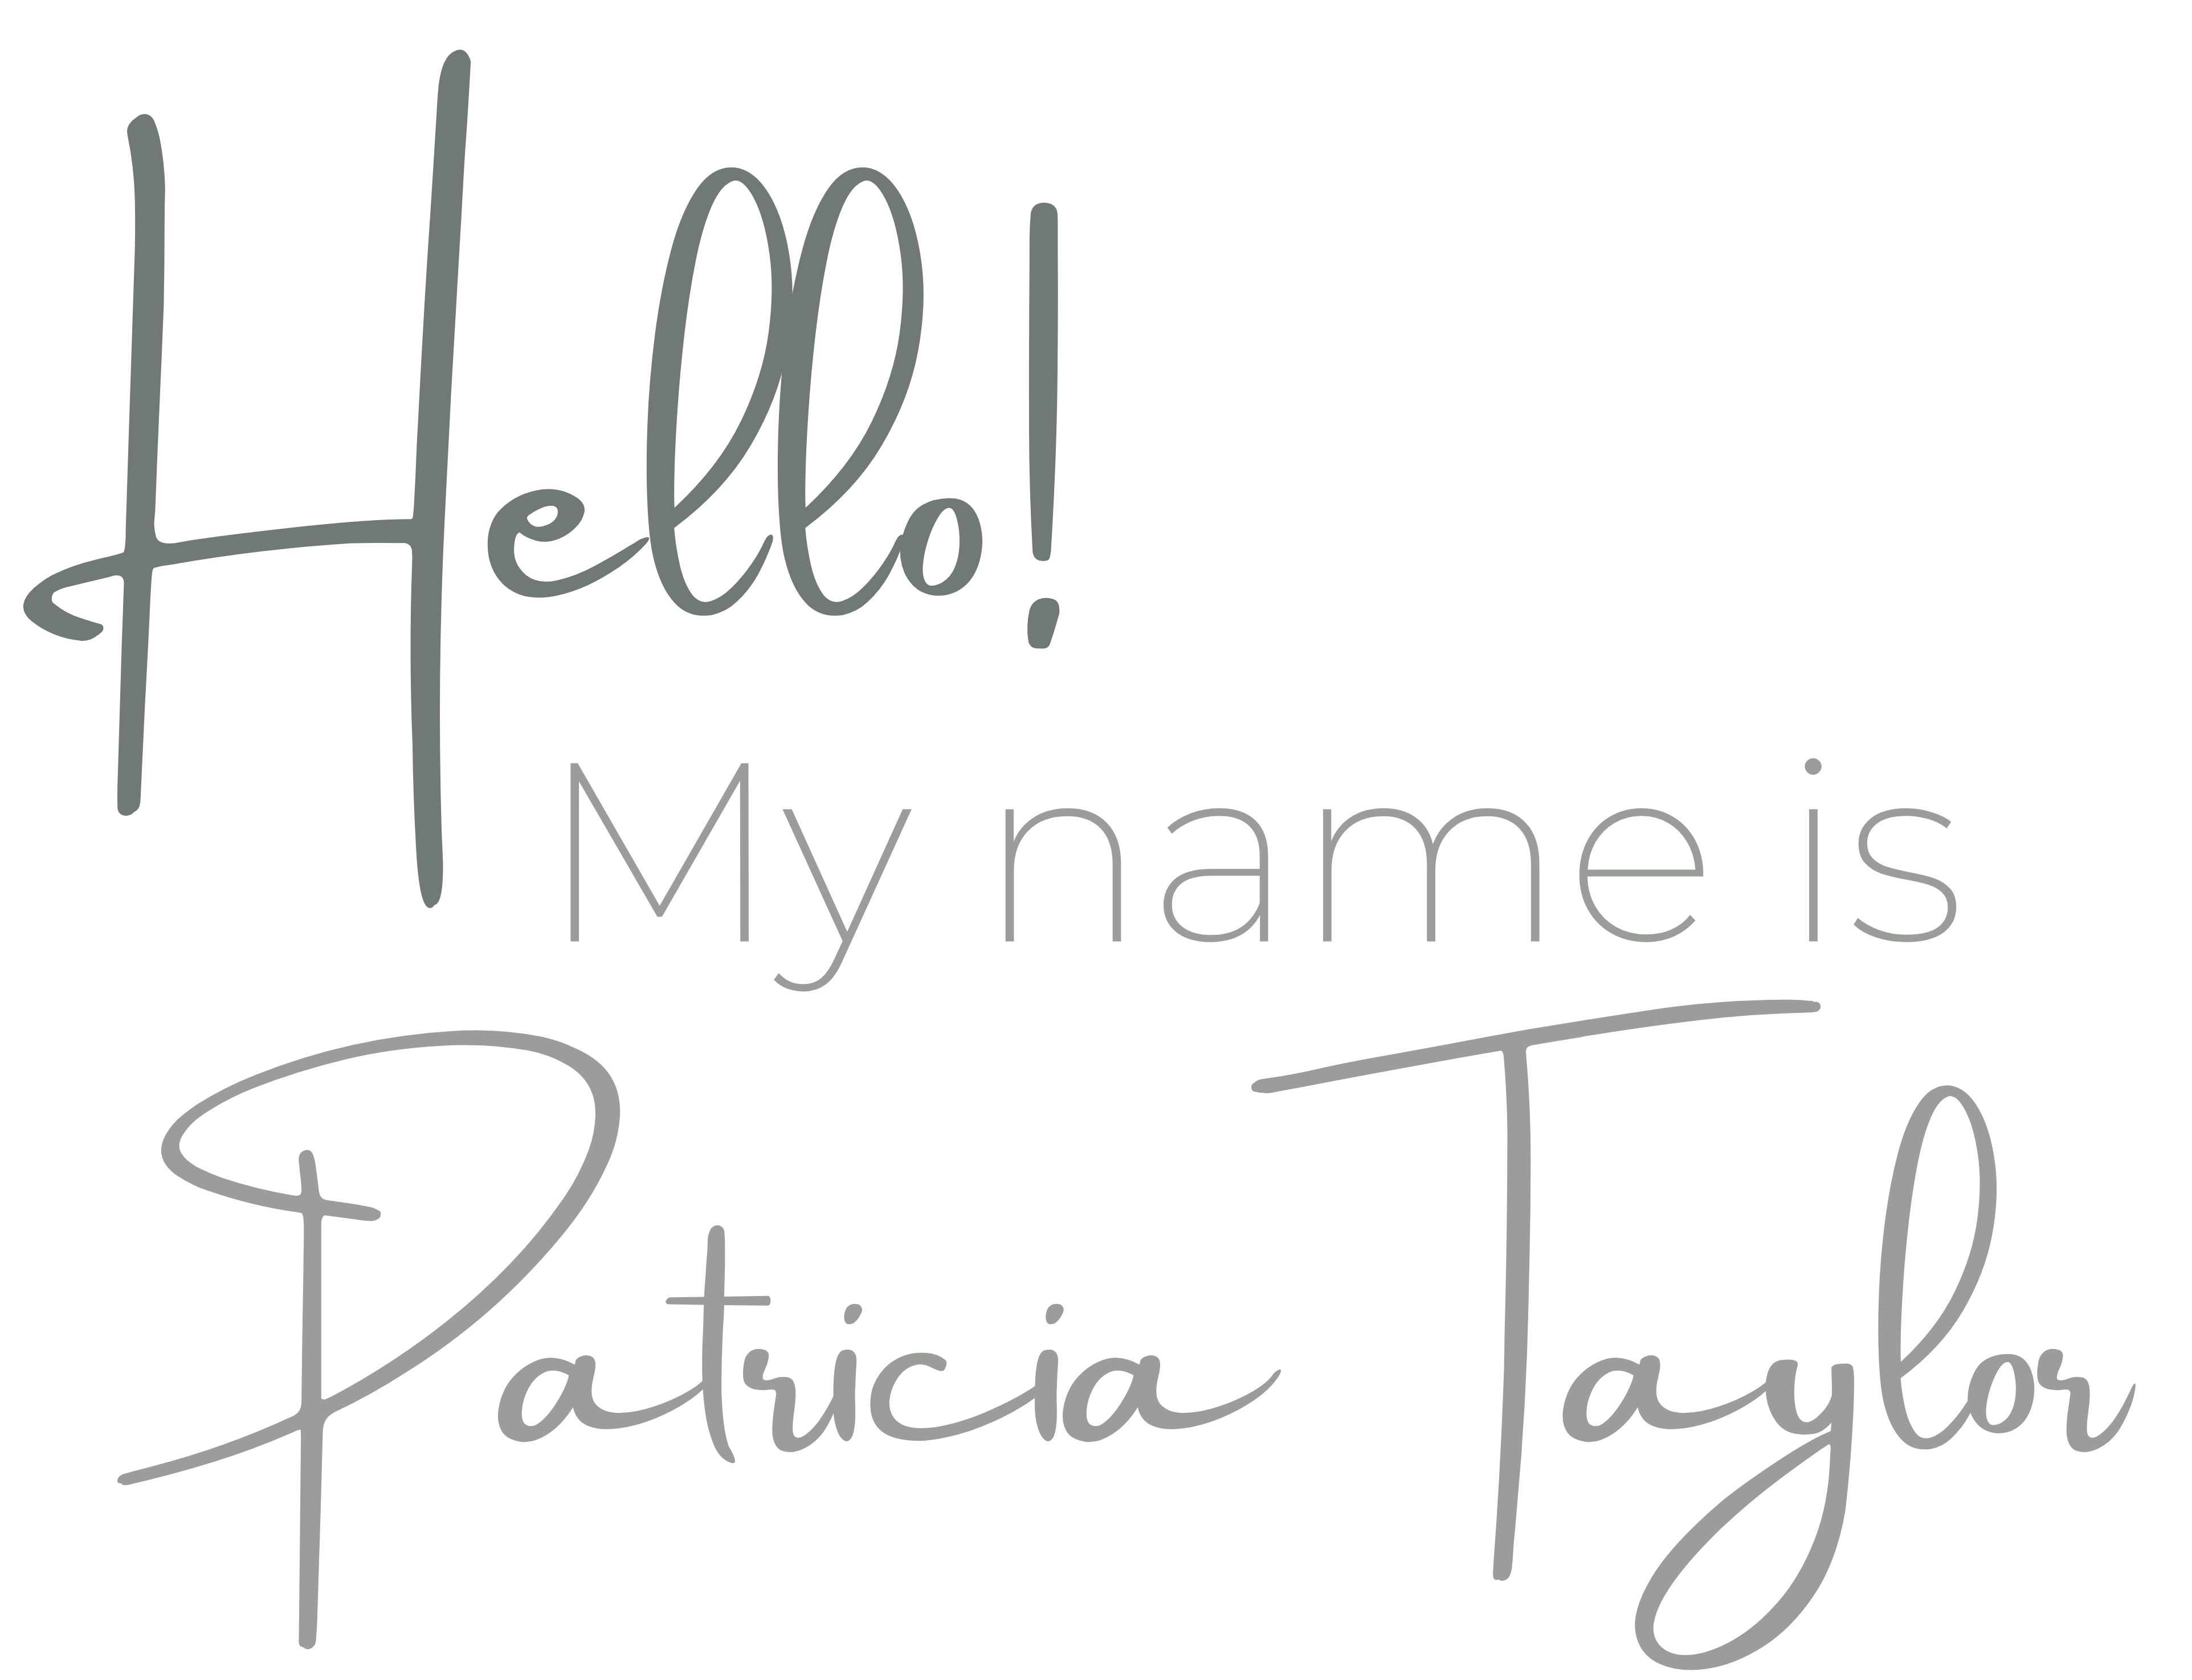 Hello, my name is Patricia